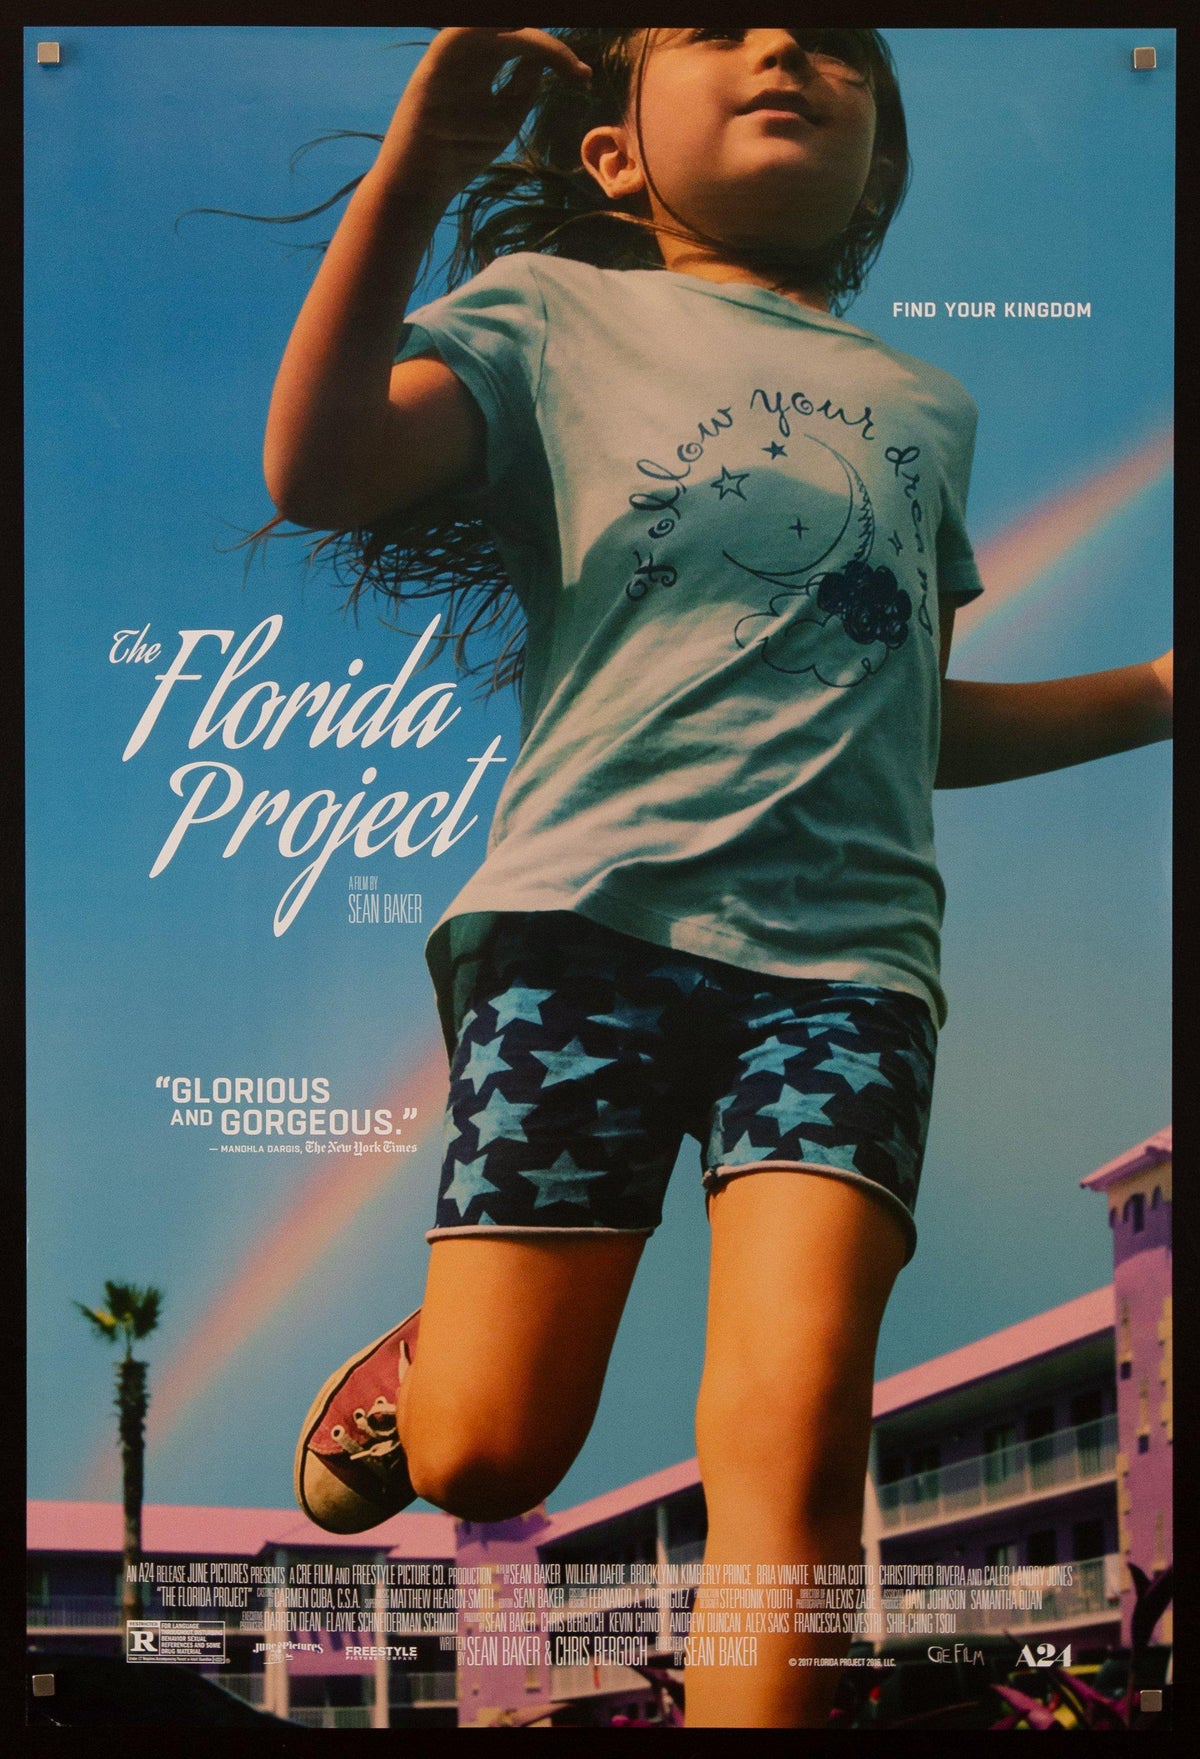 The Florida Project 1 Sheet (27x41) Original Vintage Movie Poster